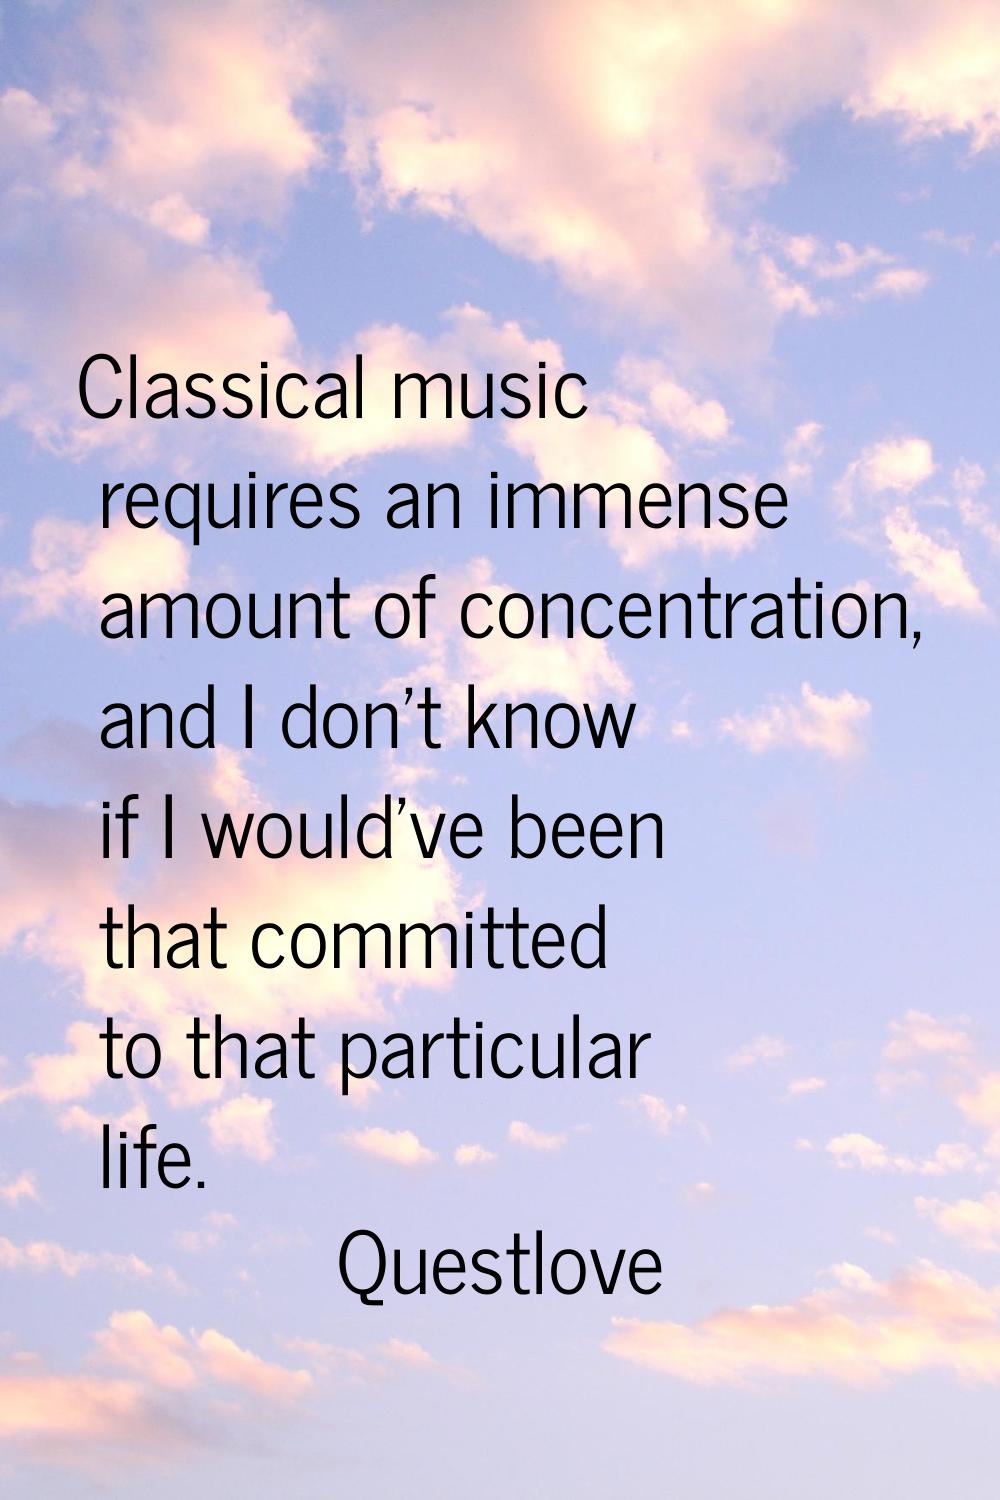 Classical music requires an immense amount of concentration, and I don't know if I would've been th